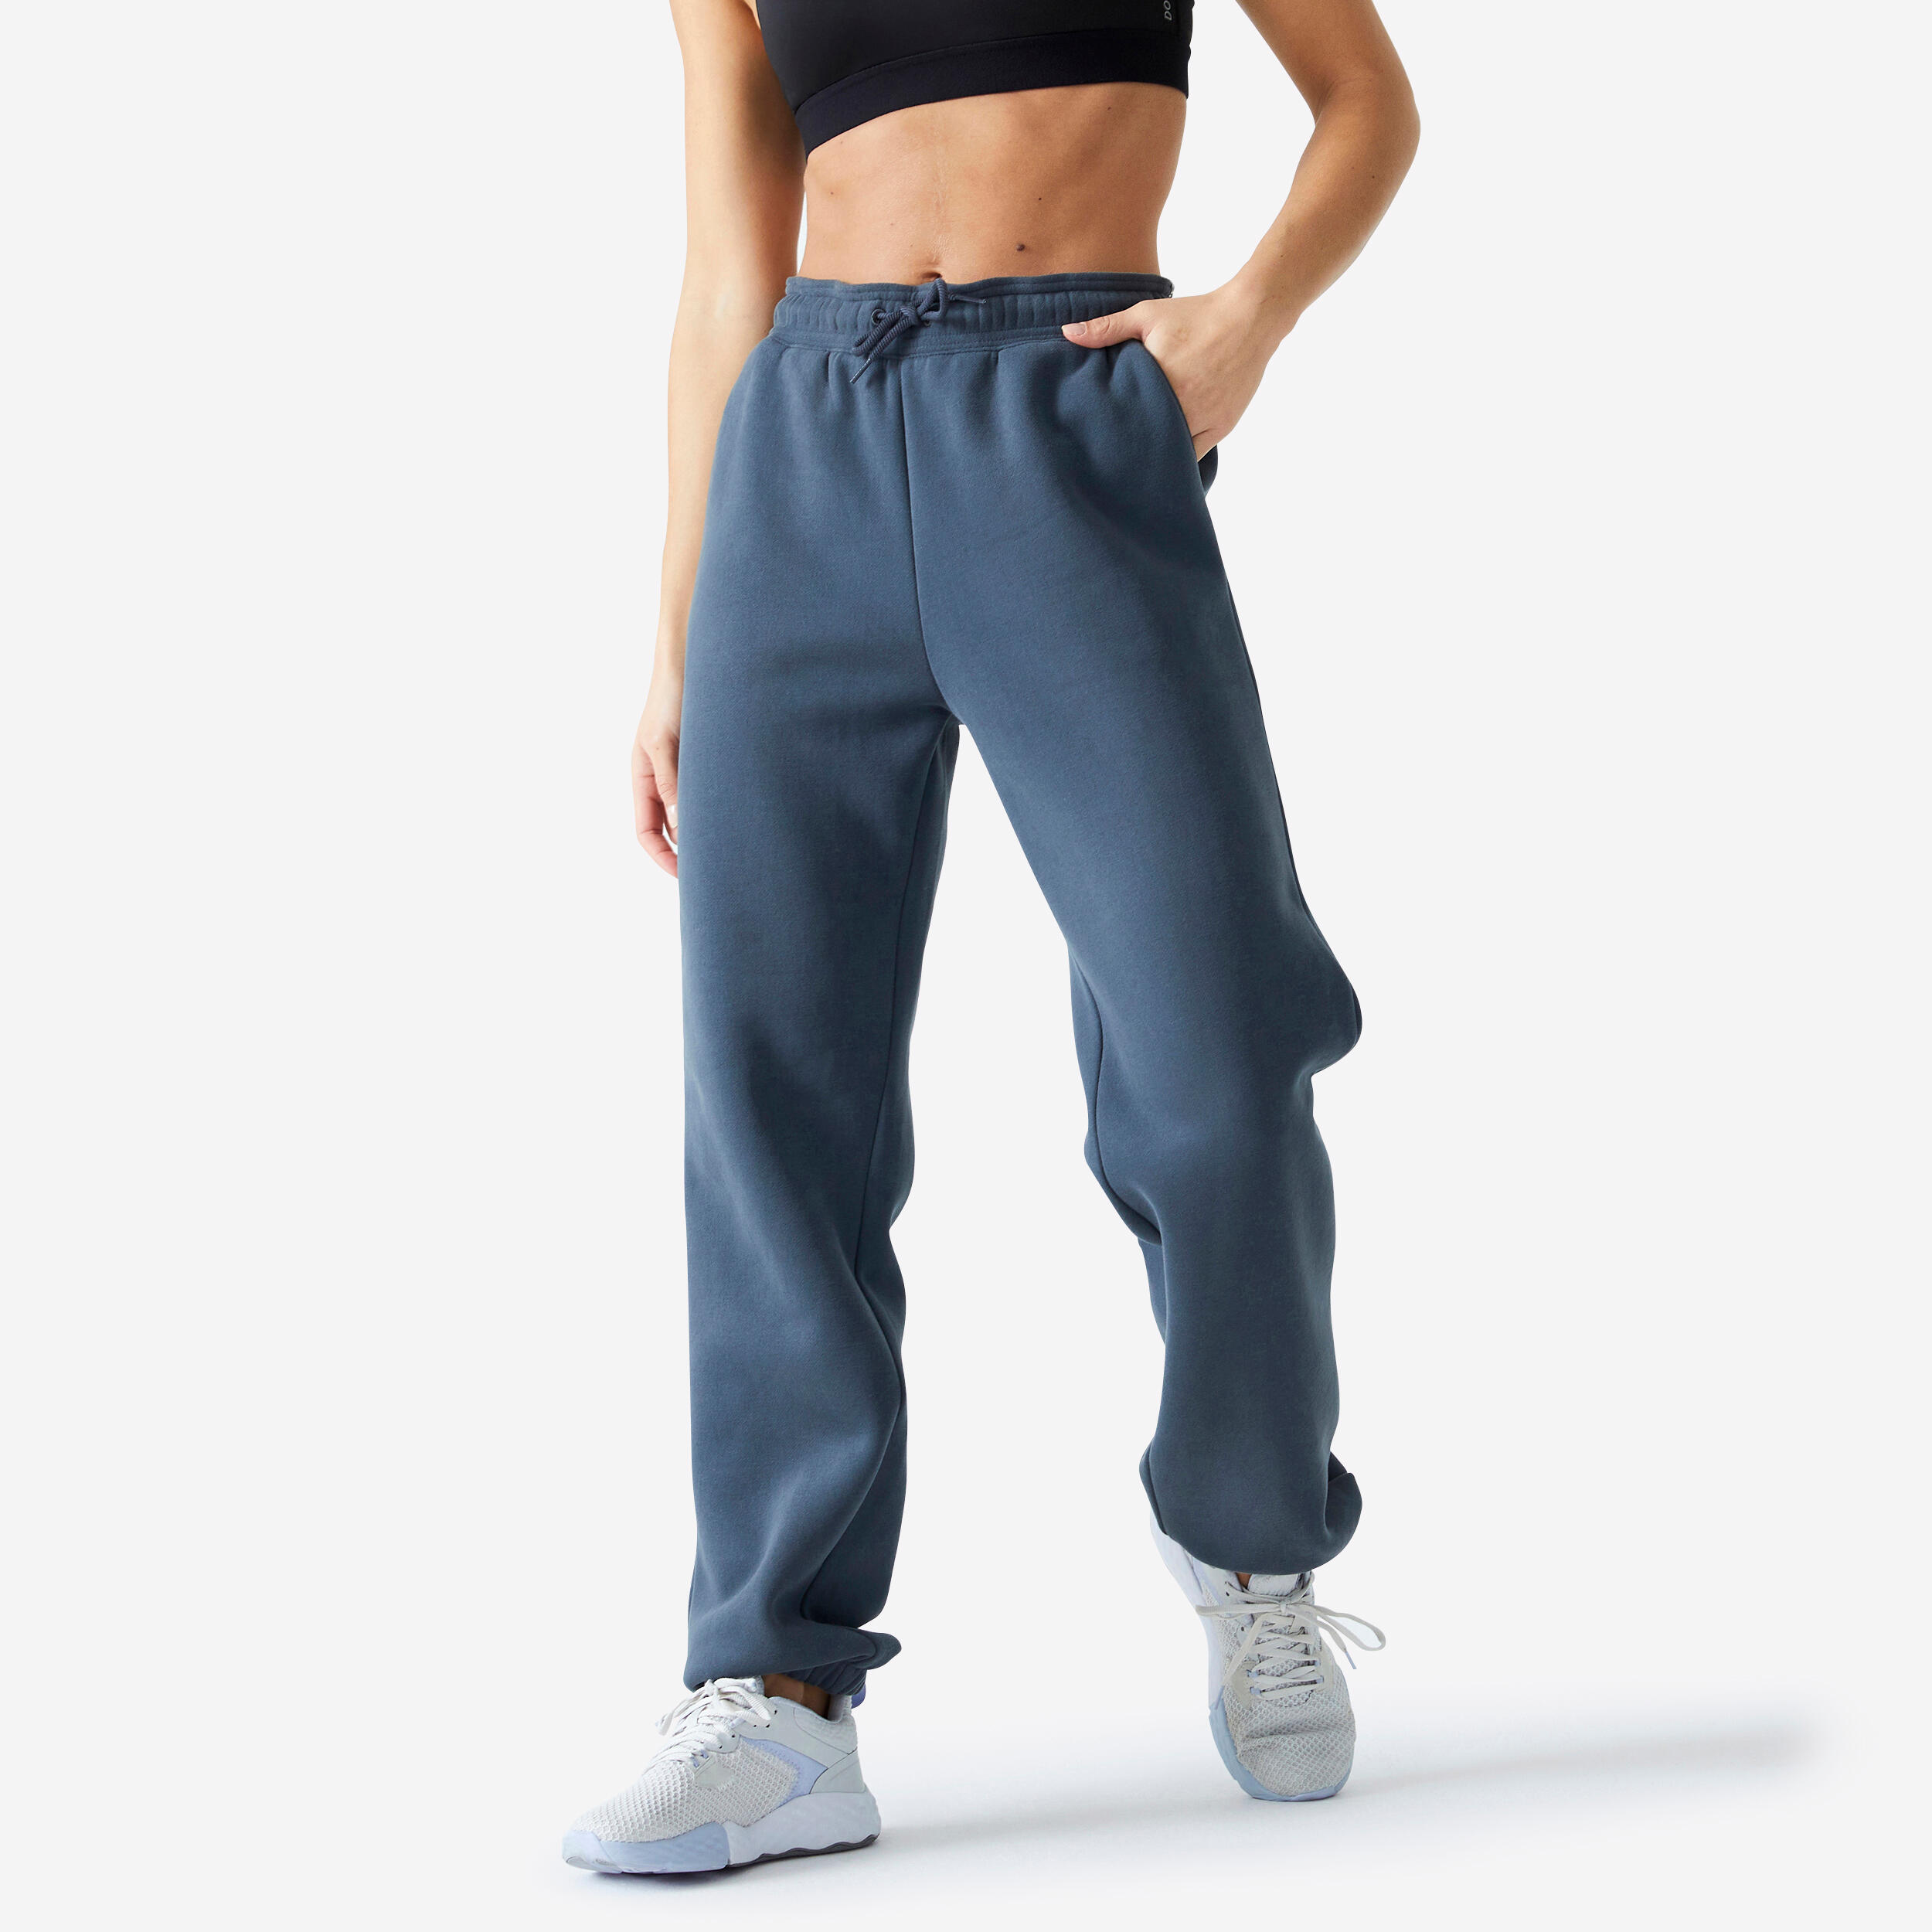 DOMYOS Women's Loose-Fit Fitness Jogging Bottoms 520 - Abyss Grey